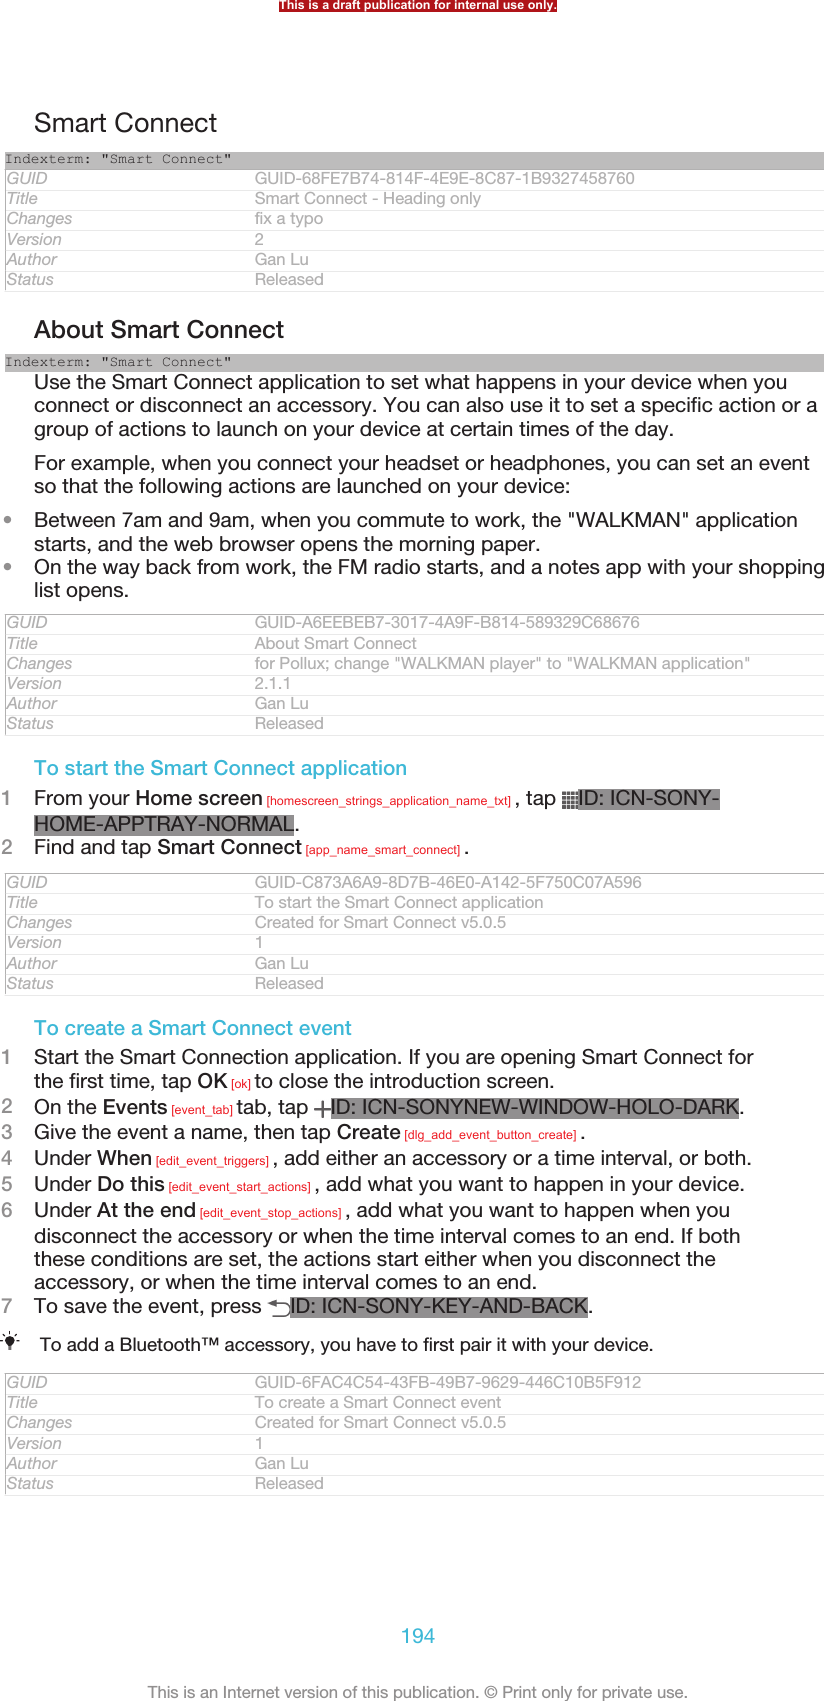 Smart ConnectIndexterm: &quot;Smart Connect&quot;GUID GUID-68FE7B74-814F-4E9E-8C87-1B9327458760Title Smart Connect - Heading onlyChanges fix a typoVersion 2Author Gan LuStatus ReleasedAbout Smart ConnectIndexterm: &quot;Smart Connect&quot;Use the Smart Connect application to set what happens in your device when youconnect or disconnect an accessory. You can also use it to set a specific action or agroup of actions to launch on your device at certain times of the day.For example, when you connect your headset or headphones, you can set an eventso that the following actions are launched on your device:•Between 7am and 9am, when you commute to work, the &quot;WALKMAN&quot; applicationstarts, and the web browser opens the morning paper.•On the way back from work, the FM radio starts, and a notes app with your shoppinglist opens.GUID GUID-A6EEBEB7-3017-4A9F-B814-589329C68676Title About Smart ConnectChanges for Pollux; change &quot;WALKMAN player&quot; to &quot;WALKMAN application&quot;Version 2.1.1Author Gan LuStatus ReleasedTo start the Smart Connect application1From your Home screen [homescreen_strings_application_name_txt] , tap  ID: ICN-SONY-HOME-APPTRAY-NORMAL.2Find and tap Smart Connect [app_name_smart_connect] .GUID GUID-C873A6A9-8D7B-46E0-A142-5F750C07A596Title To start the Smart Connect applicationChanges Created for Smart Connect v5.0.5Version 1Author Gan LuStatus ReleasedTo create a Smart Connect event1Start the Smart Connection application. If you are opening Smart Connect forthe first time, tap OK [ok] to close the introduction screen.2On the Events [event_tab] tab, tap  ID: ICN-SONYNEW-WINDOW-HOLO-DARK.3Give the event a name, then tap Create [dlg_add_event_button_create] .4Under When [edit_event_triggers] , add either an accessory or a time interval, or both.5Under Do this [edit_event_start_actions] , add what you want to happen in your device.6Under At the end [edit_event_stop_actions] , add what you want to happen when youdisconnect the accessory or when the time interval comes to an end. If boththese conditions are set, the actions start either when you disconnect theaccessory, or when the time interval comes to an end.7To save the event, press  ID: ICN-SONY-KEY-AND-BACK.To add a Bluetooth™ accessory, you have to first pair it with your device.GUID GUID-6FAC4C54-43FB-49B7-9629-446C10B5F912Title To create a Smart Connect eventChanges Created for Smart Connect v5.0.5Version 1Author Gan LuStatus ReleasedThis is a draft publication for internal use only.194This is an Internet version of this publication. © Print only for private use.